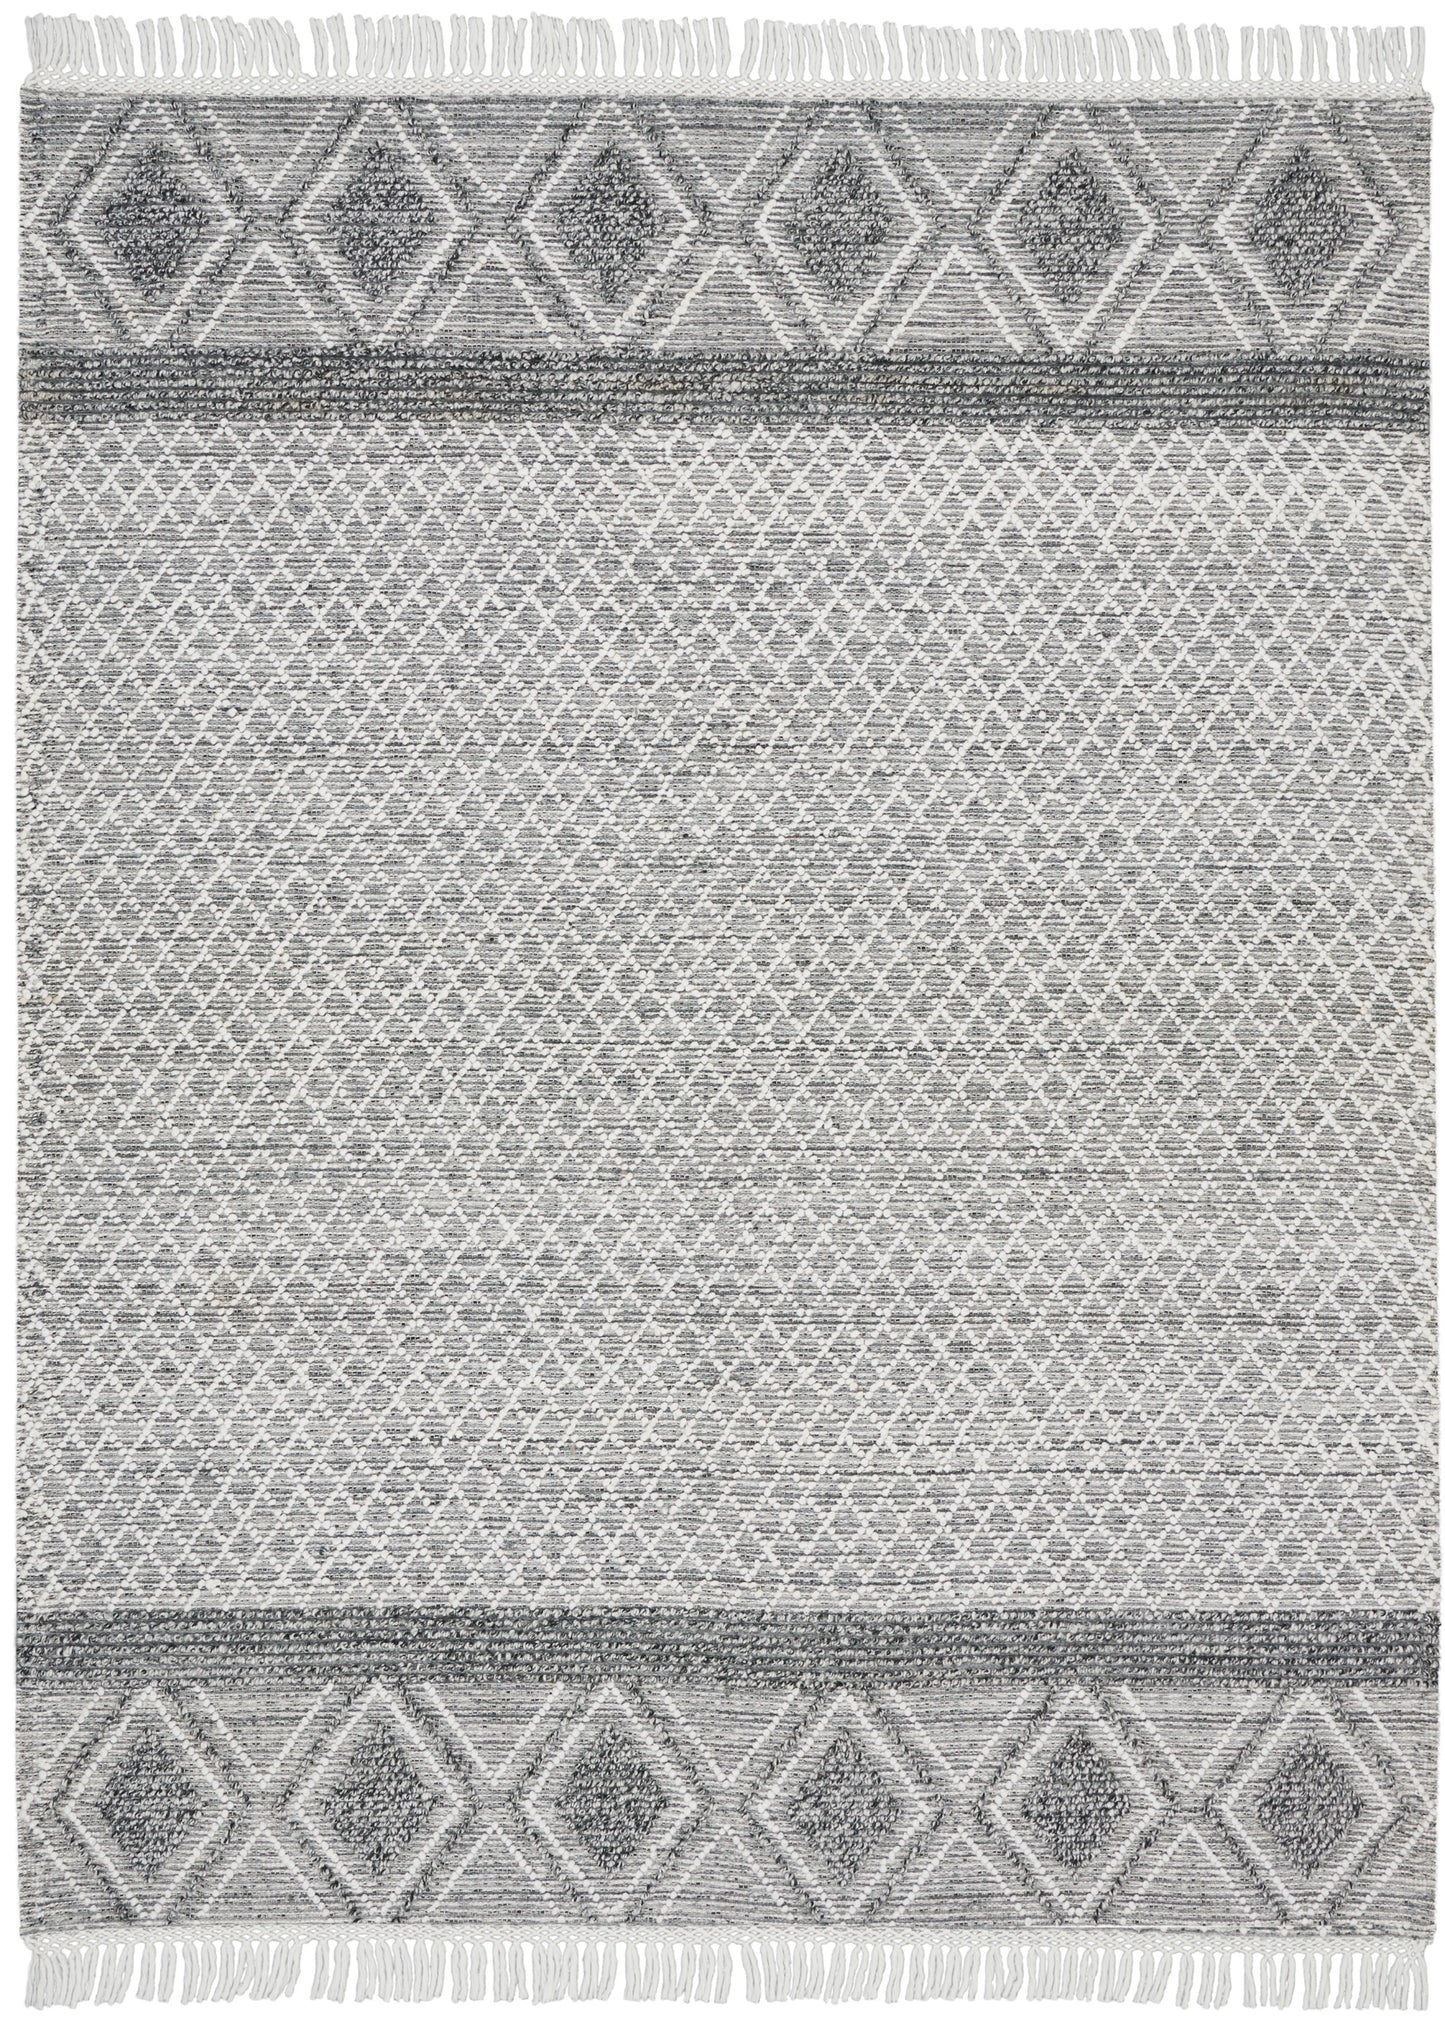 Nicole Curtis Series 3 SR303 Grey Ivory  Contemporary Woven Rug